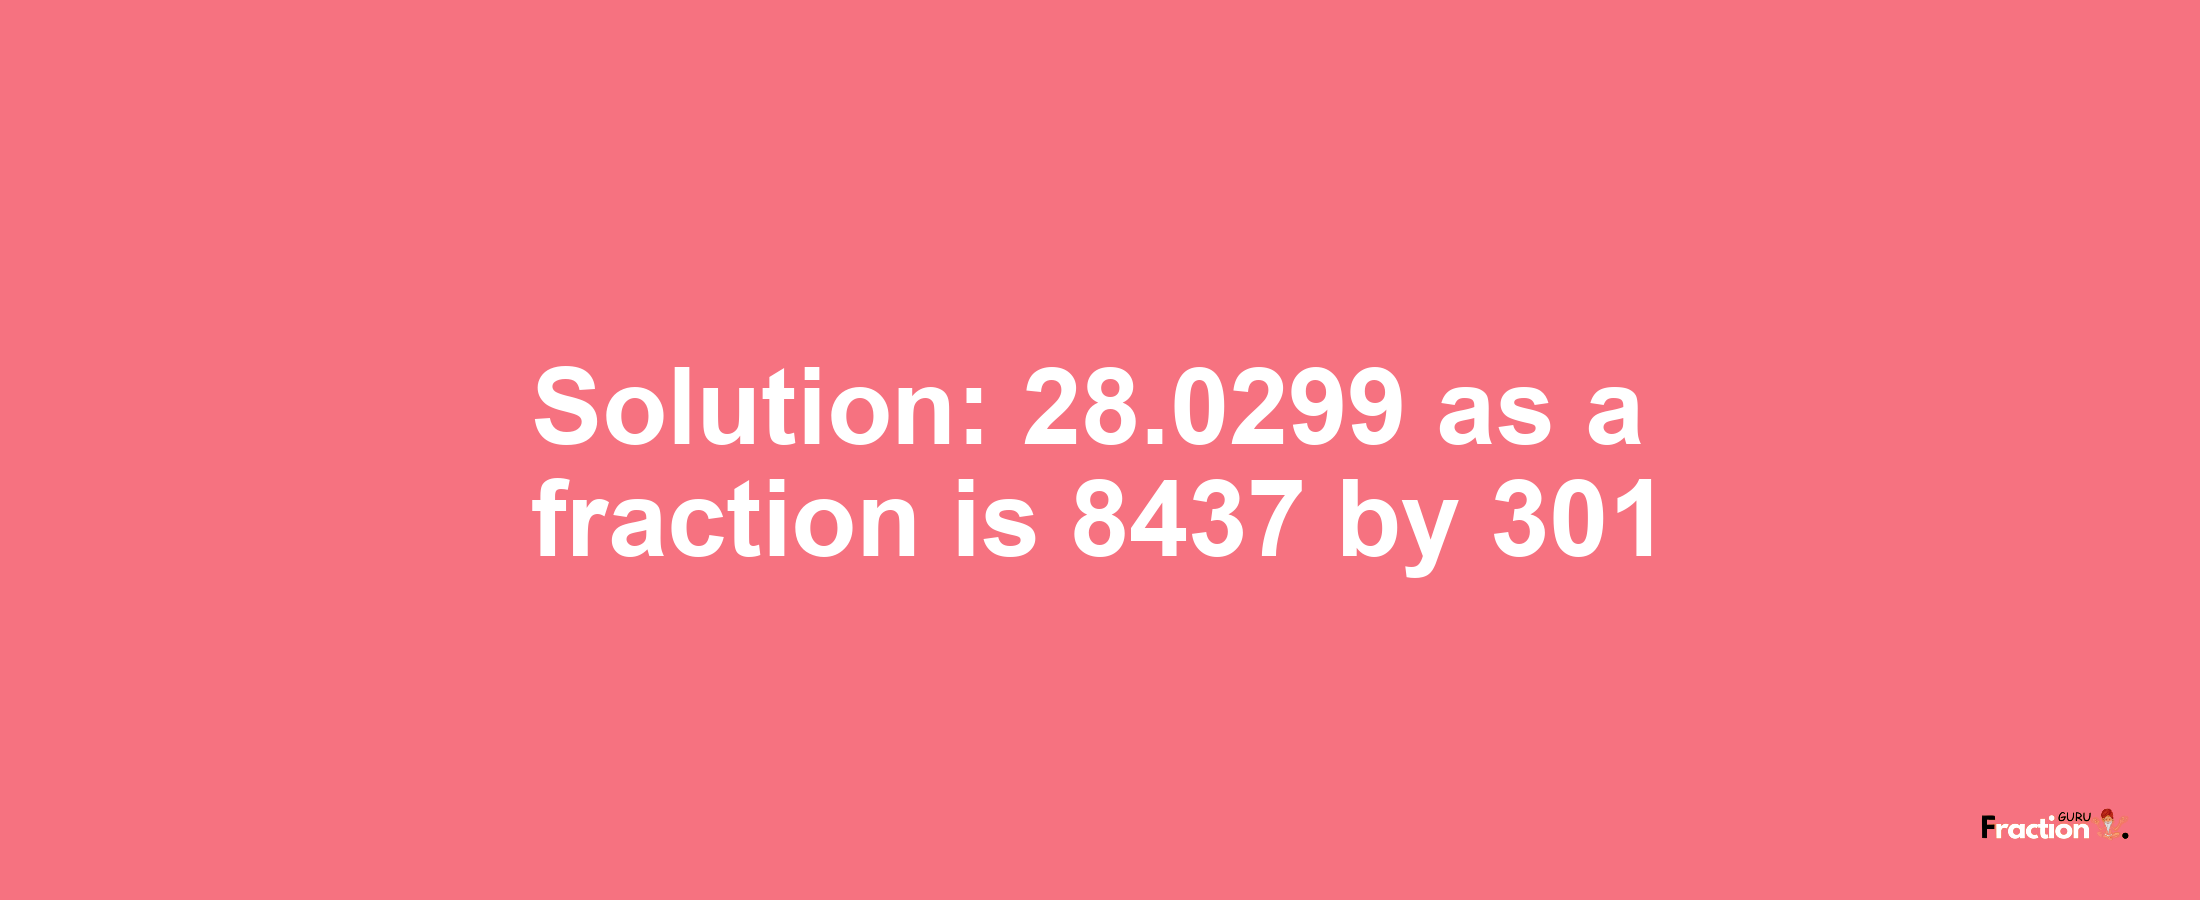 Solution:28.0299 as a fraction is 8437/301